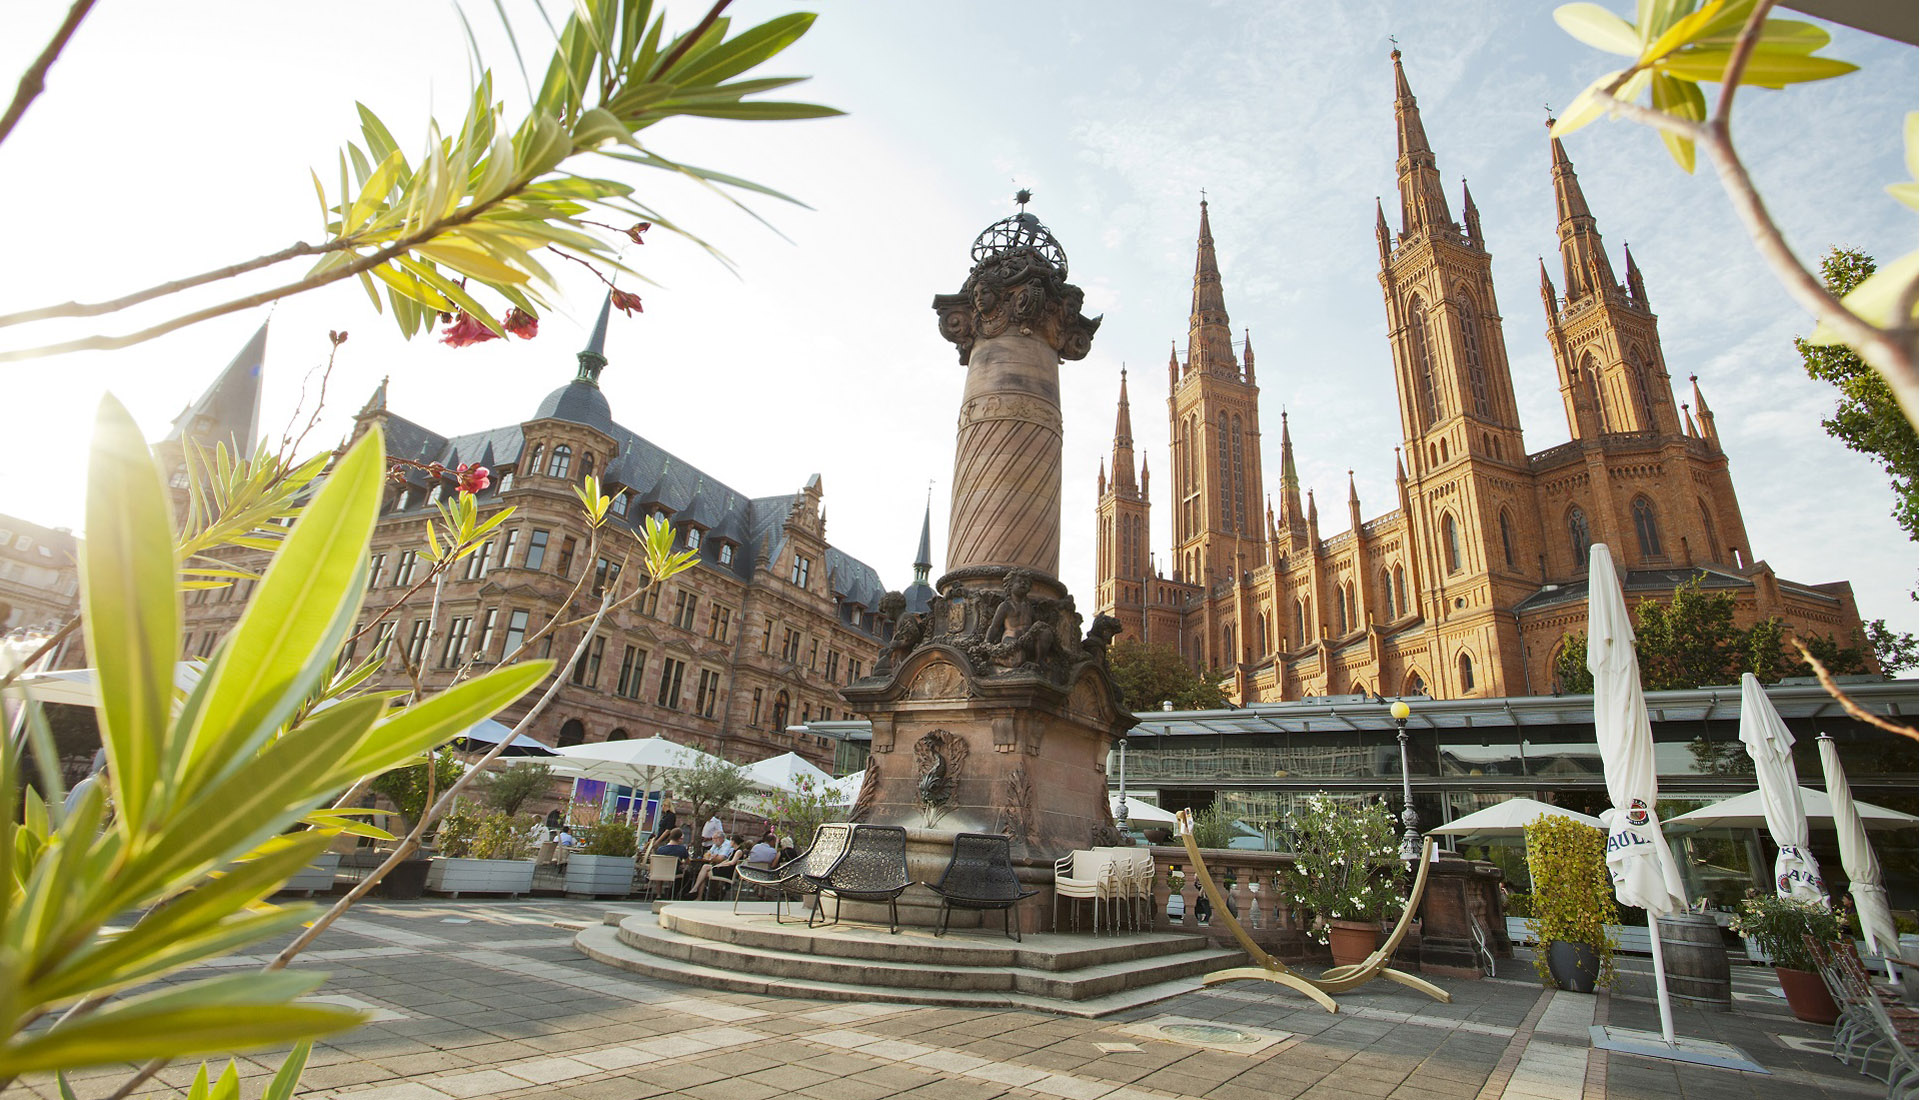 [Translate to English:] Wiesbaden Market Place